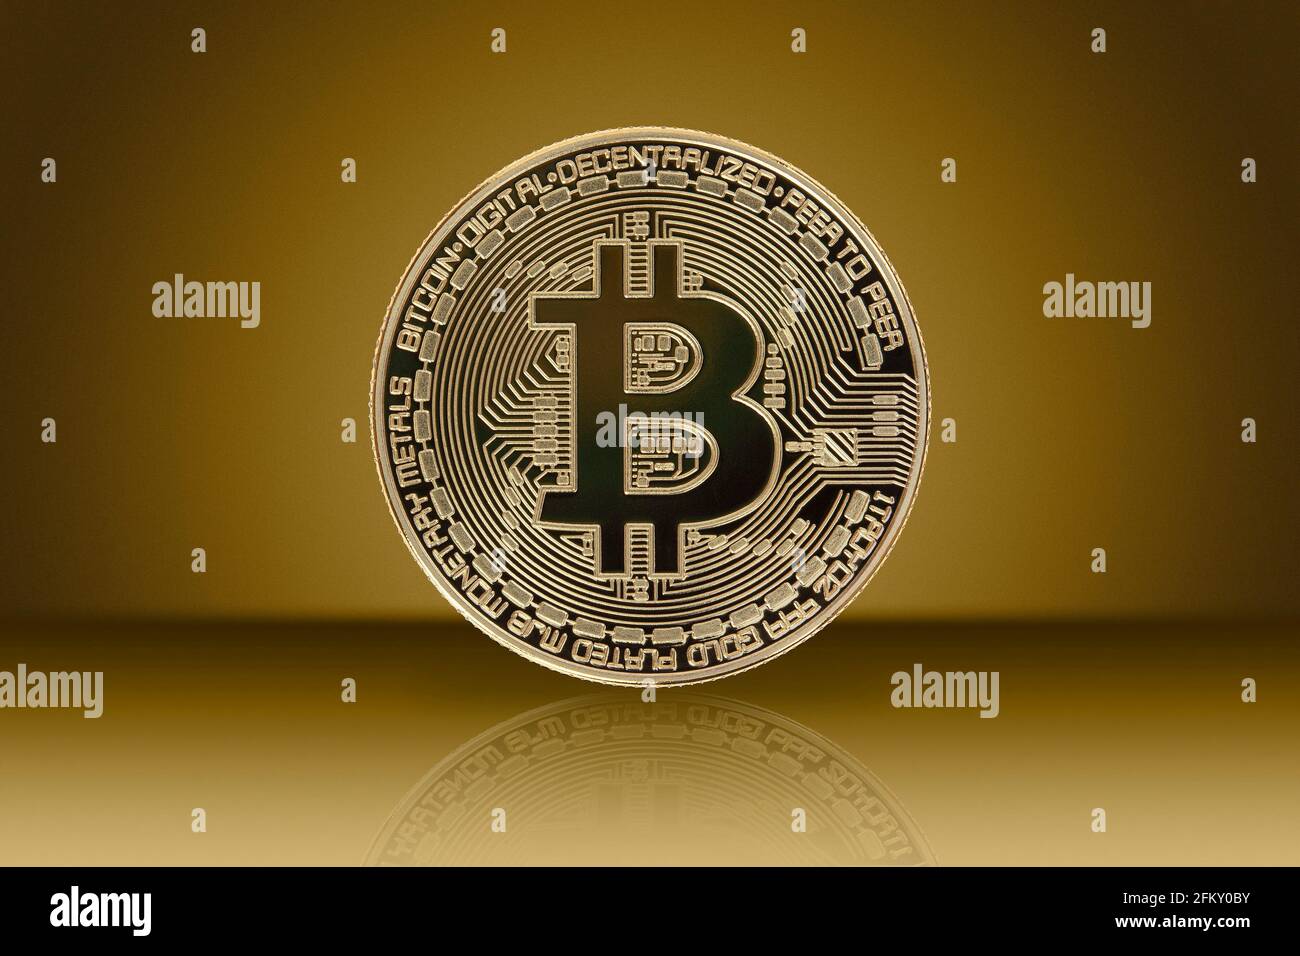 Bitcoin, Cryptocurrency, Virtual Currency Stock Photo